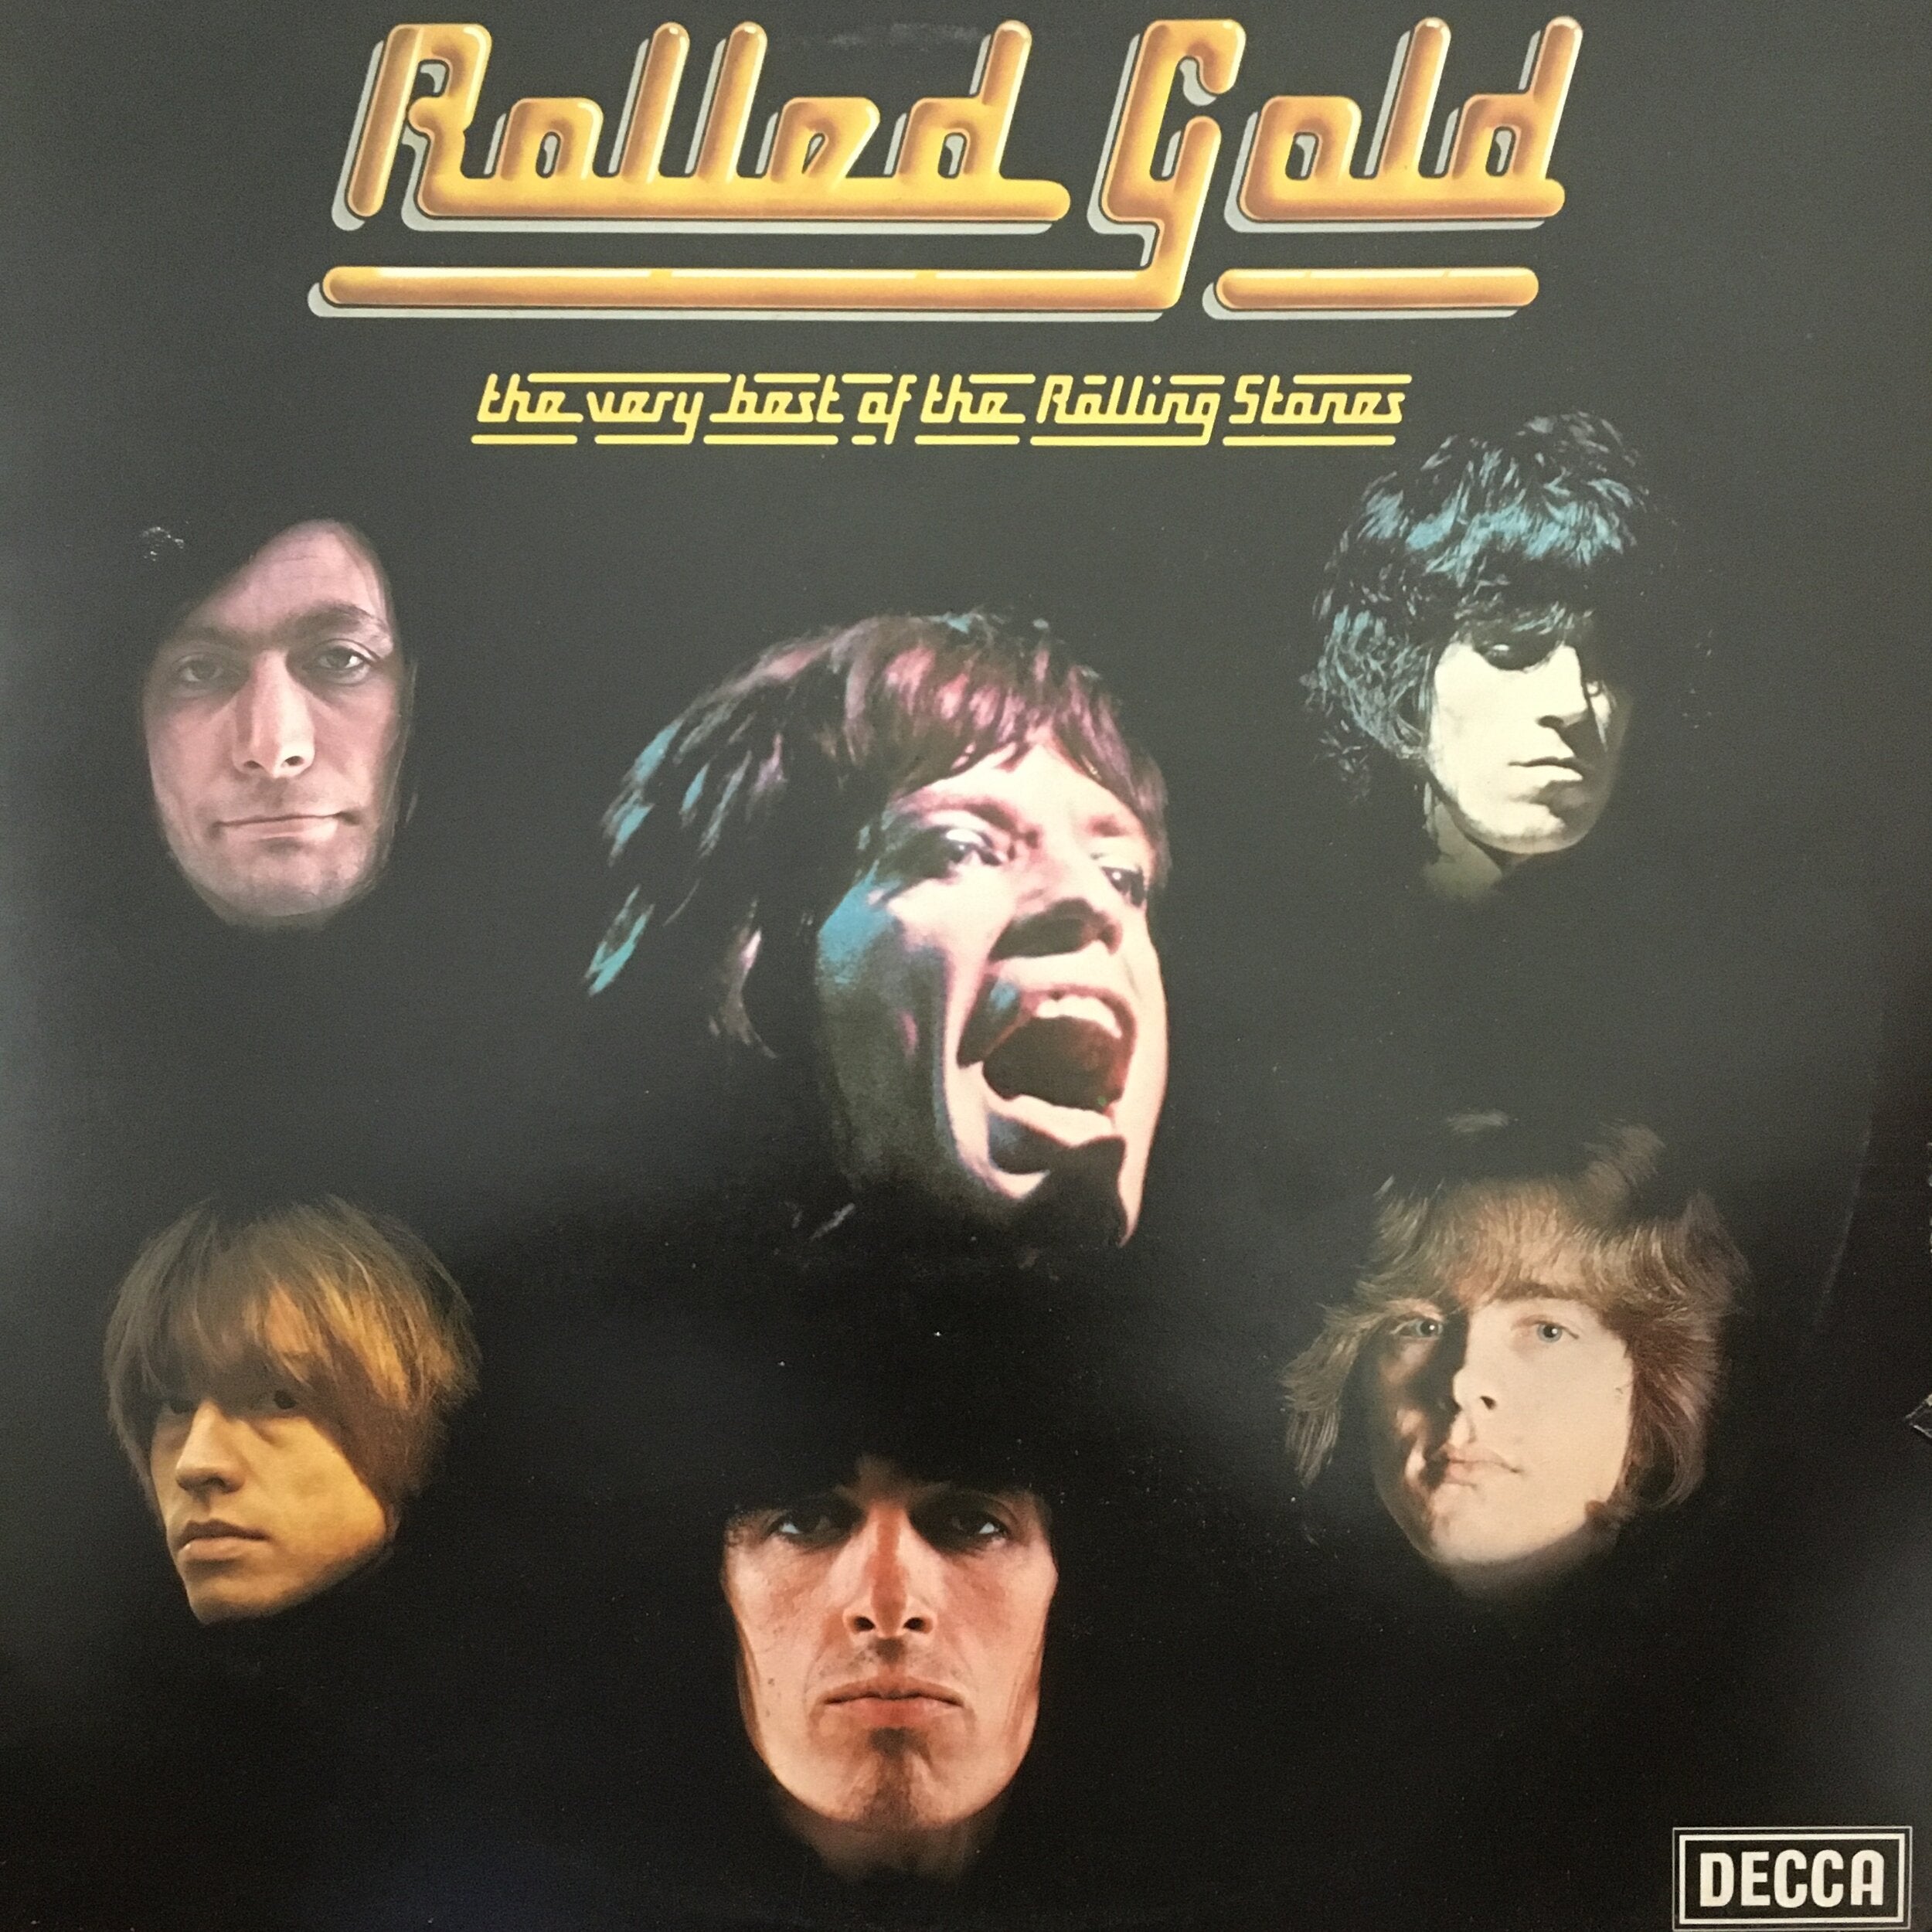 The Rolling Stones | Rolled Gold - The Very Best Of The Rolling Stones